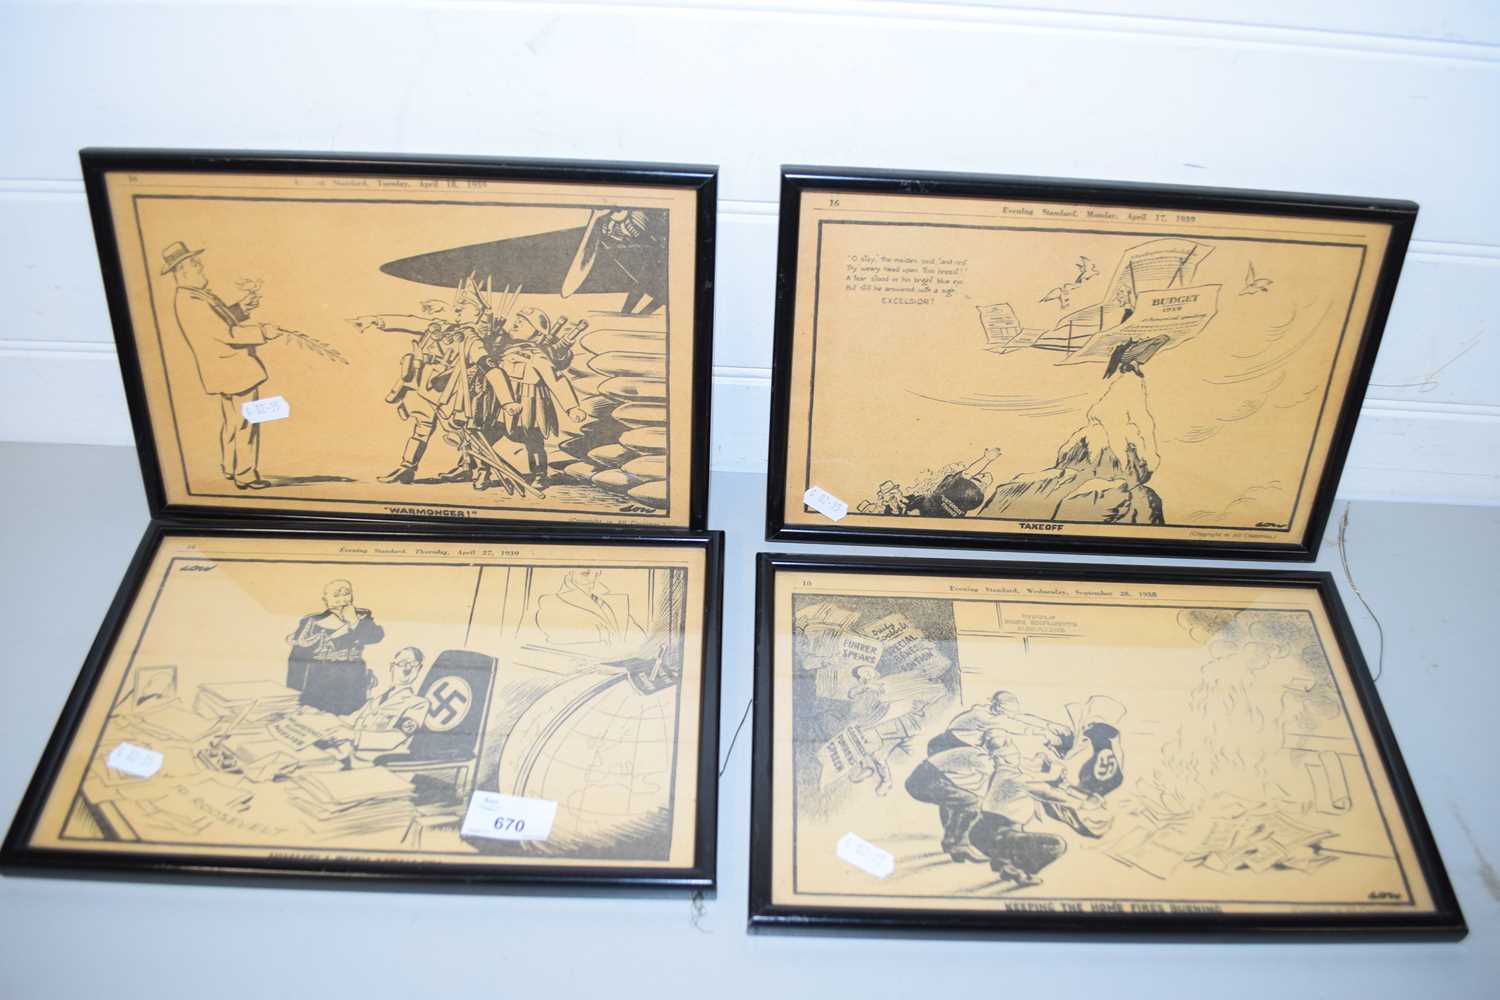 GROUP OF FOUR FRAMED PRINTS FROM THE EVENING STANDARD DEPICTING ANTI-NAZI CARTOONS